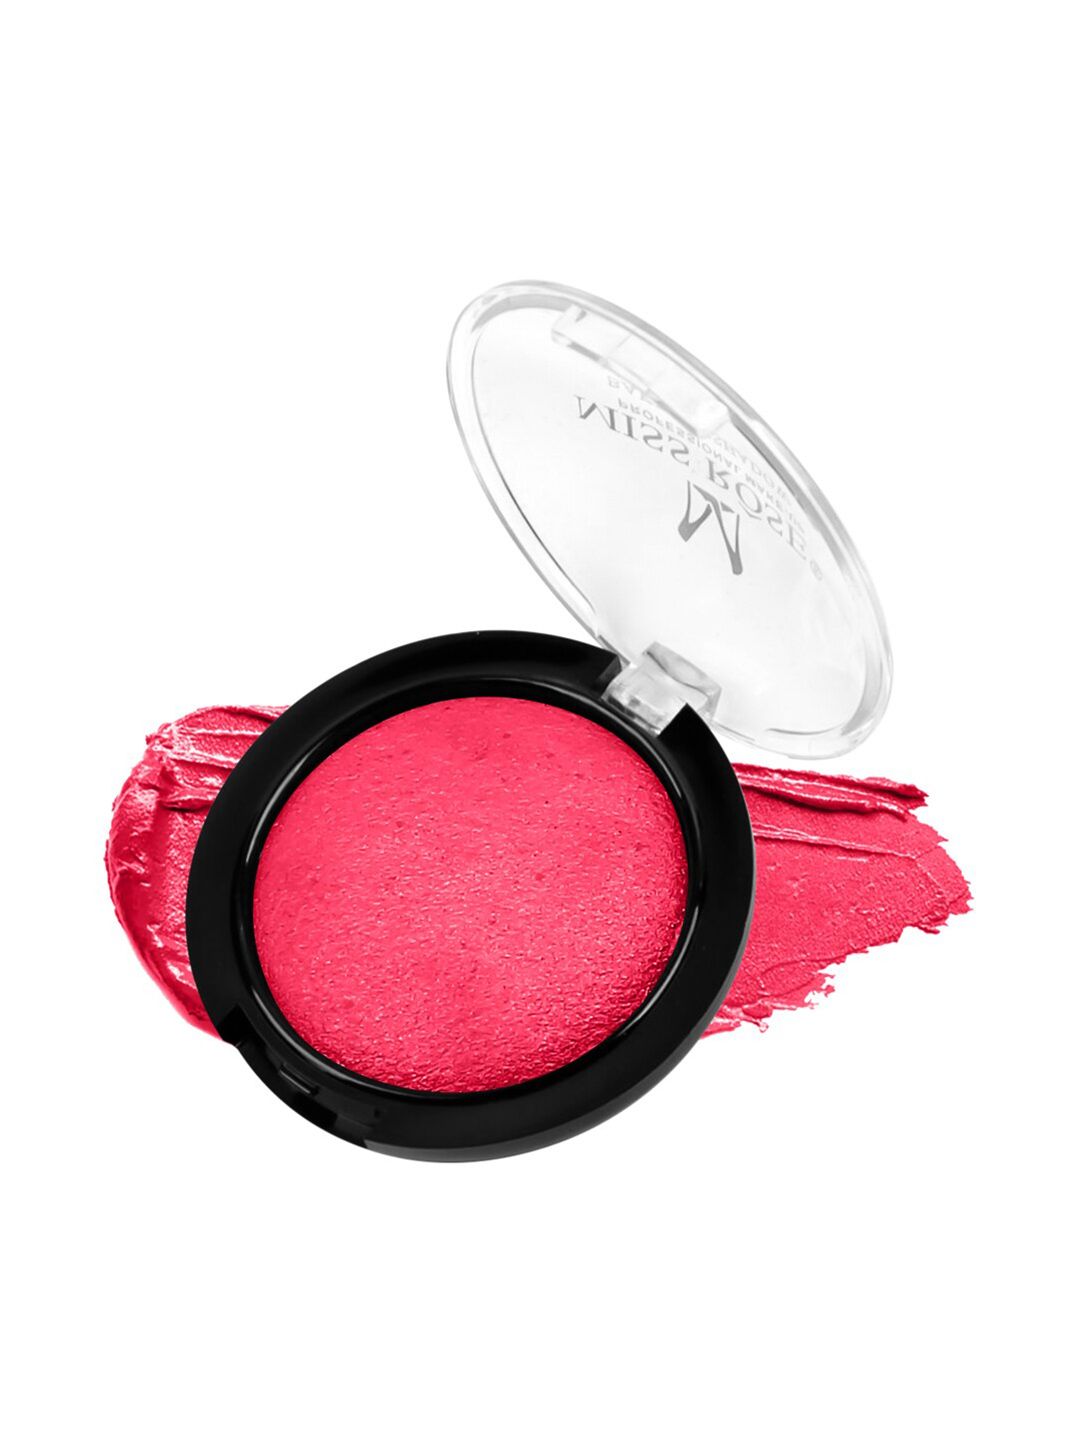 MISS ROSE MonochroMe Baked Eyeshadow Price in India